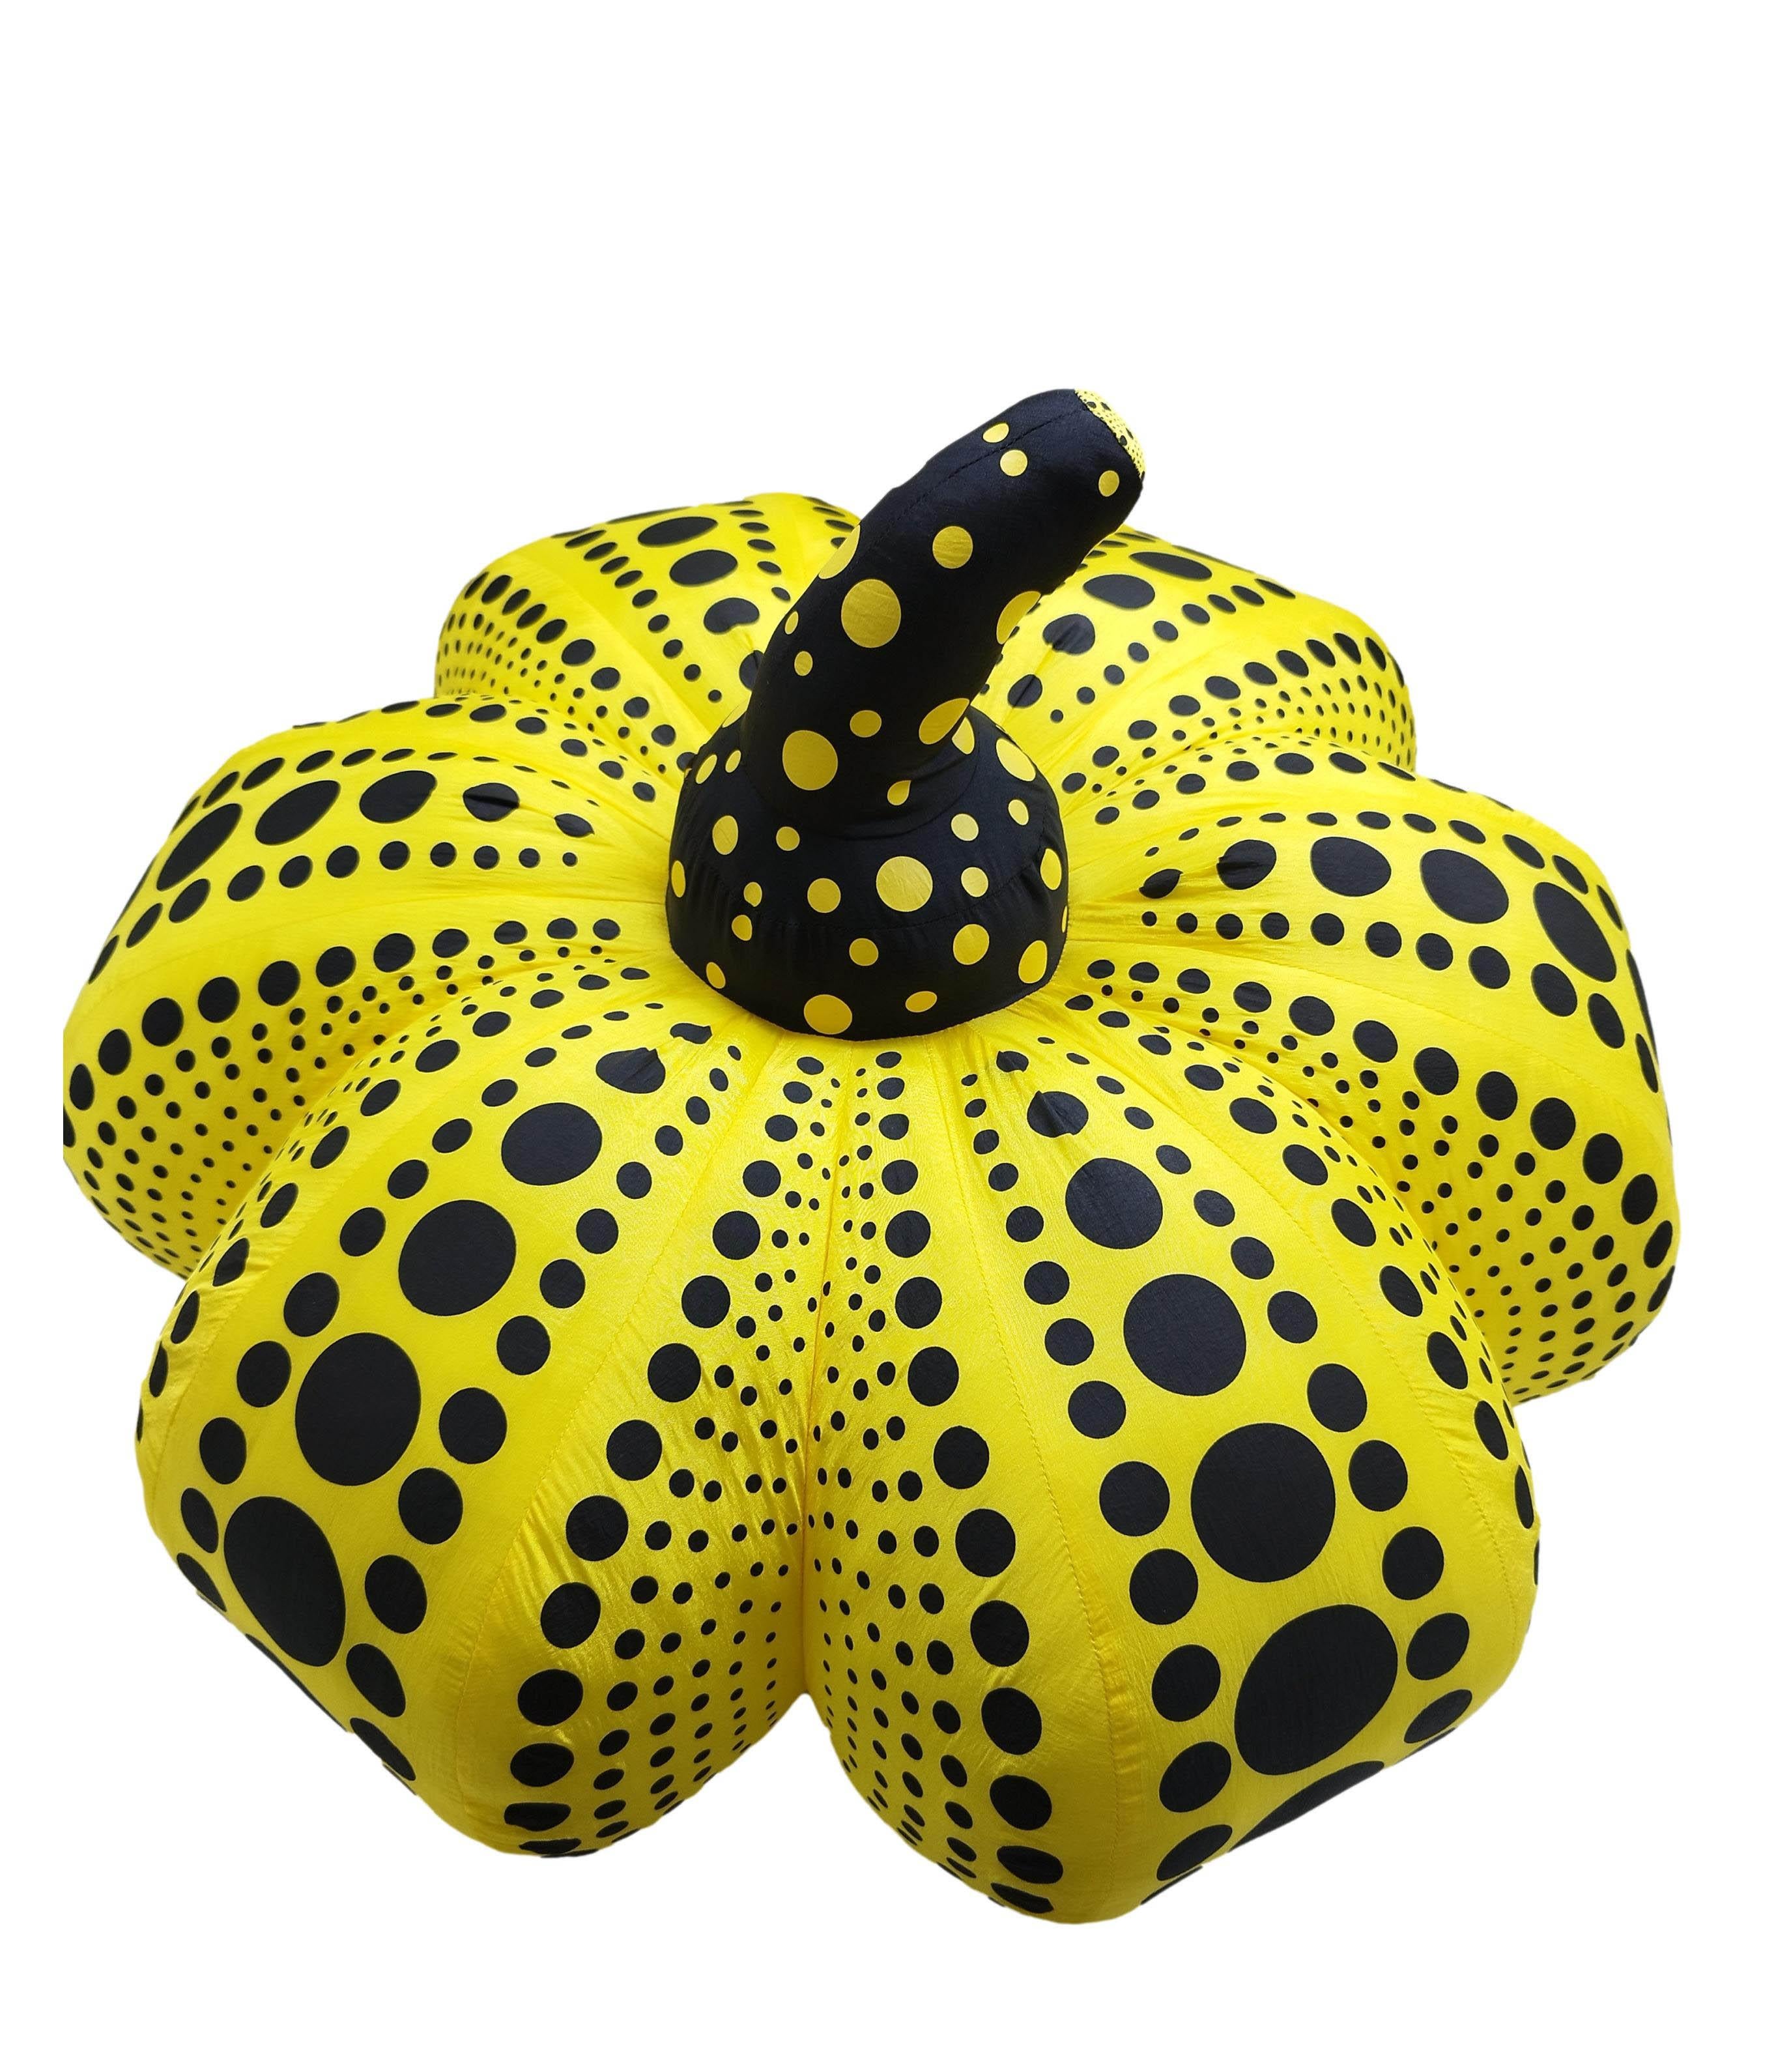 An iconic piece of brightly coloured pop art, this large plush pumpkin by Kusama features the universal polka dot motifs and bright colours for which the artist is perhaps best known. The pumpkin was first used at the 1993 Venice Biennale for the